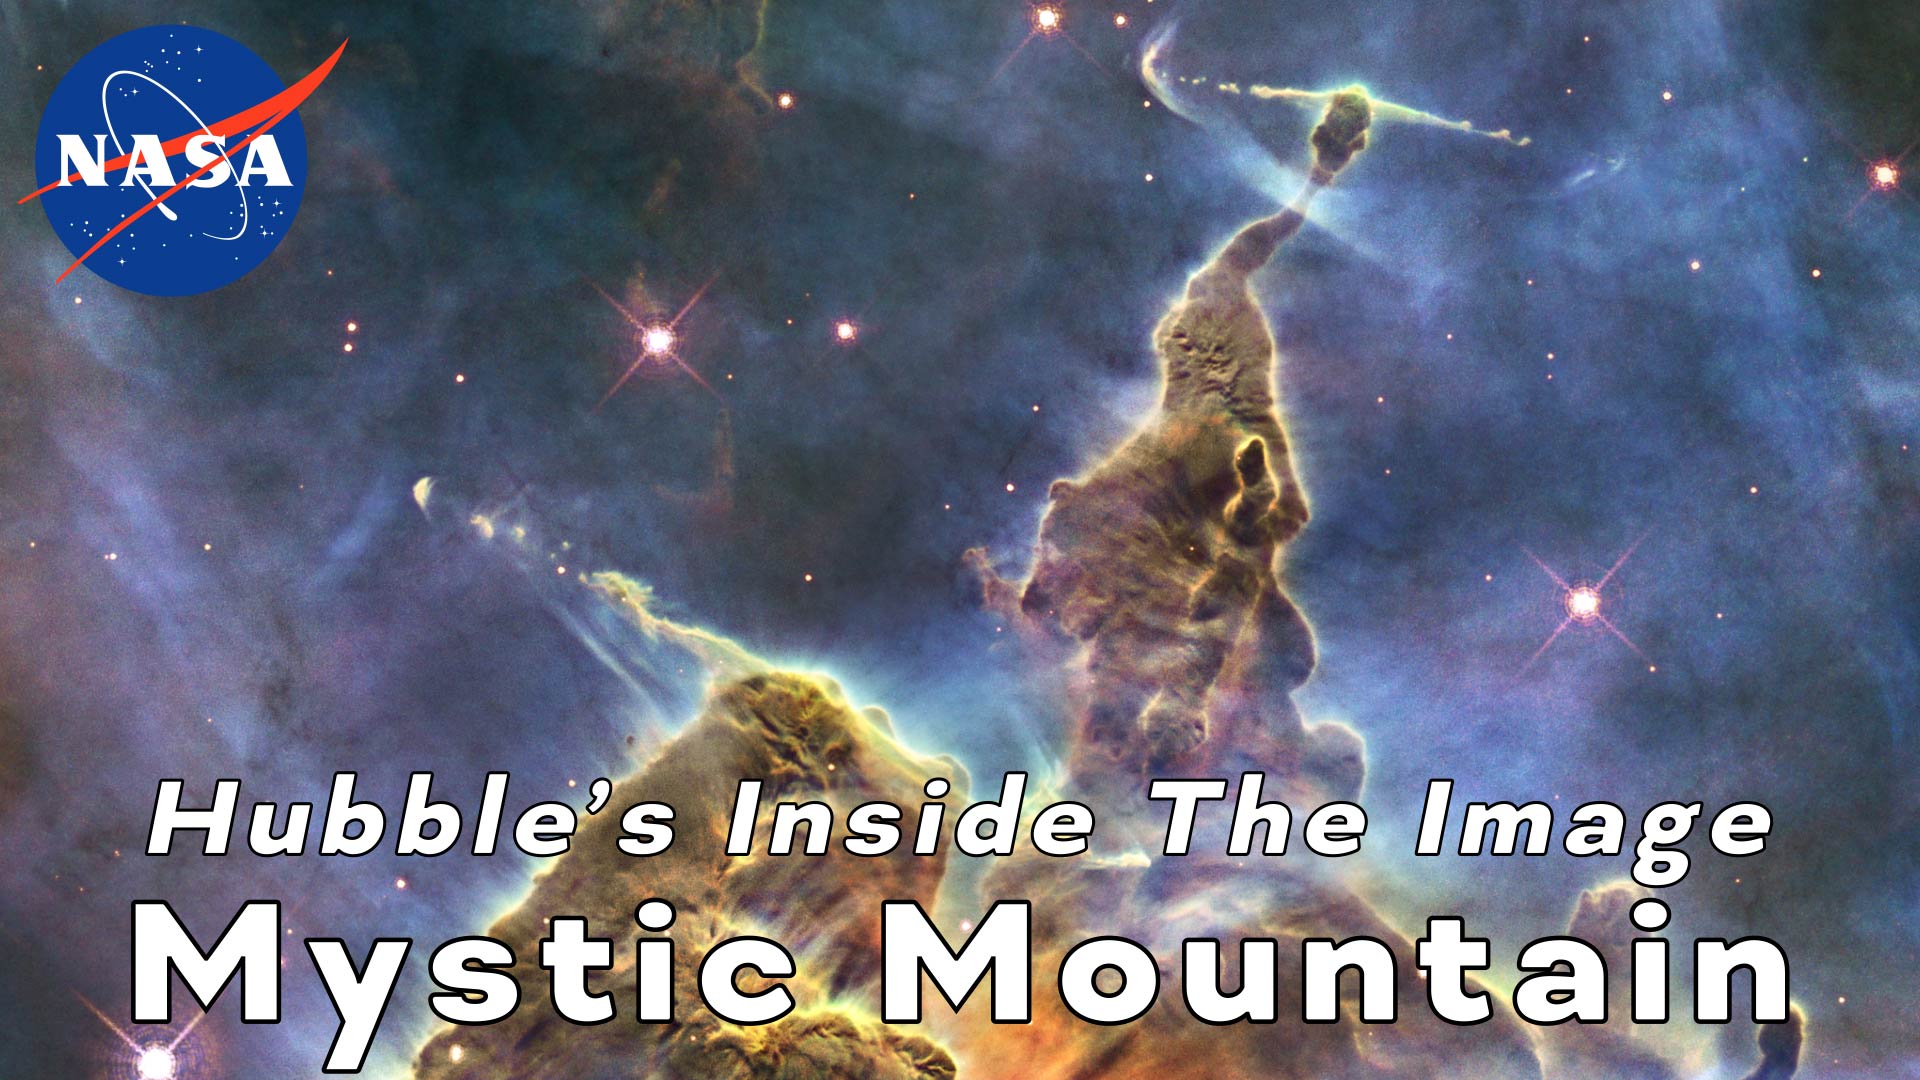 Preview Image for Hubble’s Inside The Image: Mystic Mountain